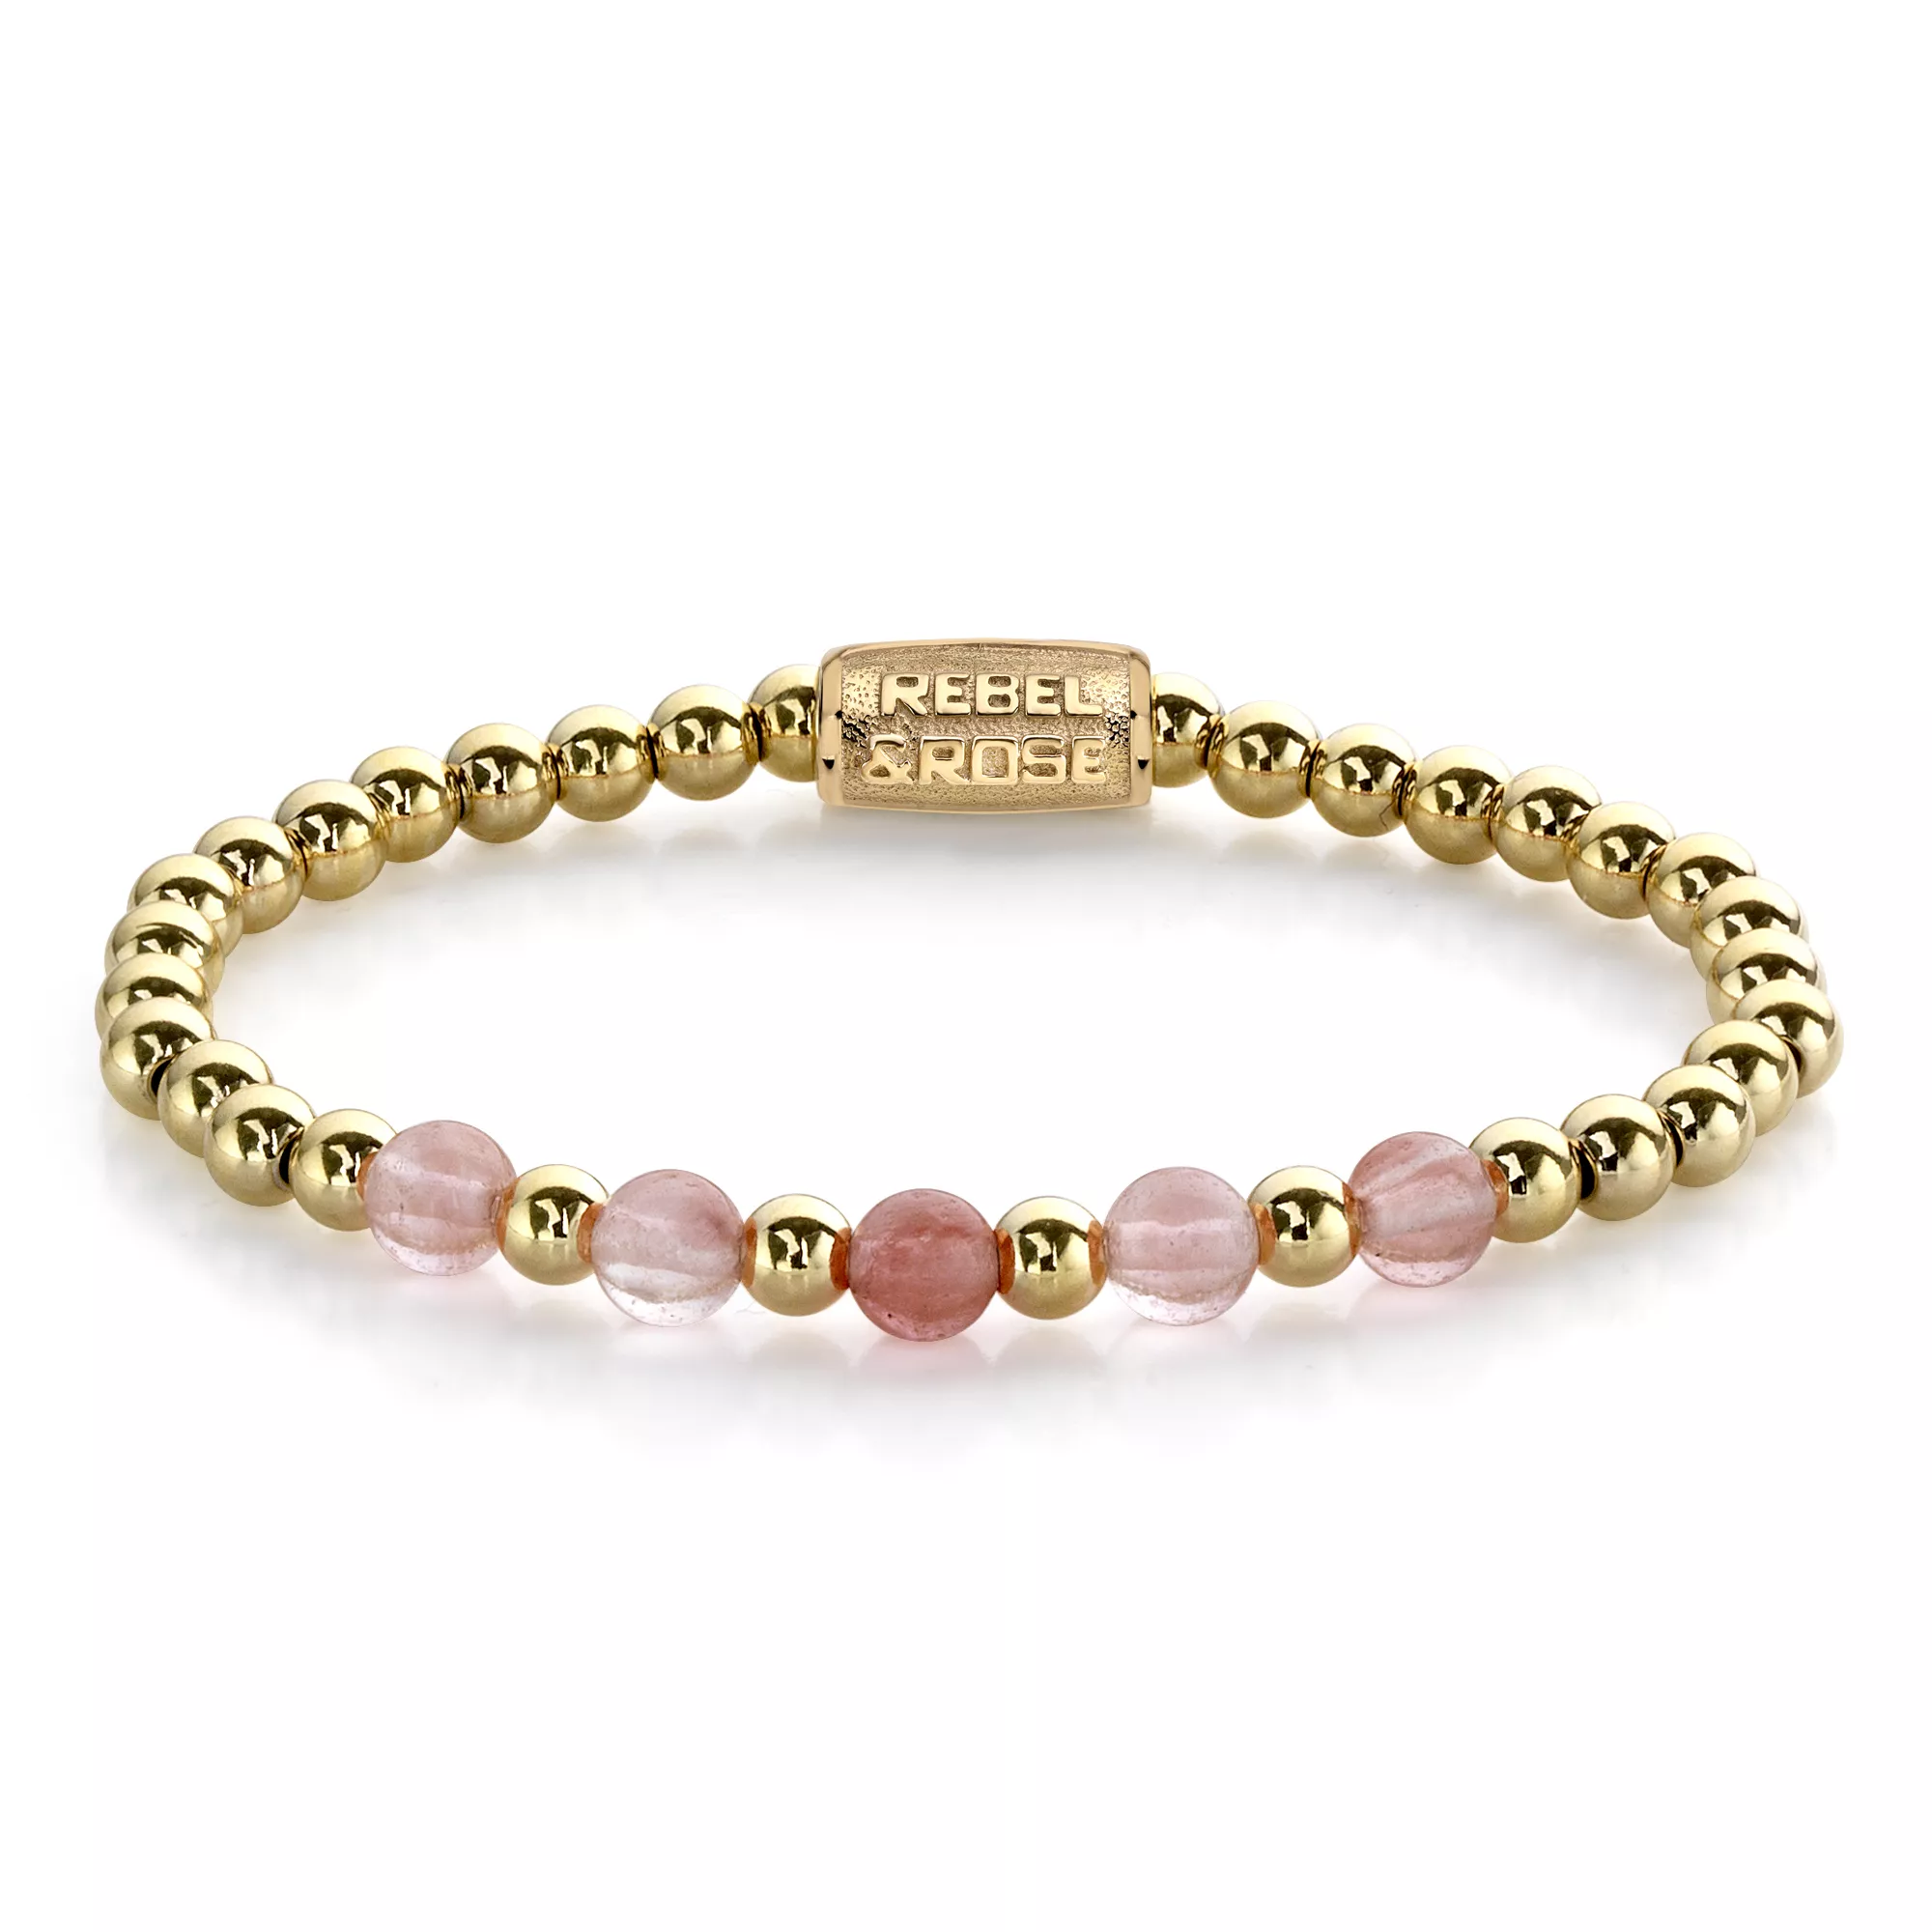 Rebel and Rose RR-60081-G Rekarmband Beads Yellow Gold meets Cherry Rose goudkleurig-roze 6 mm